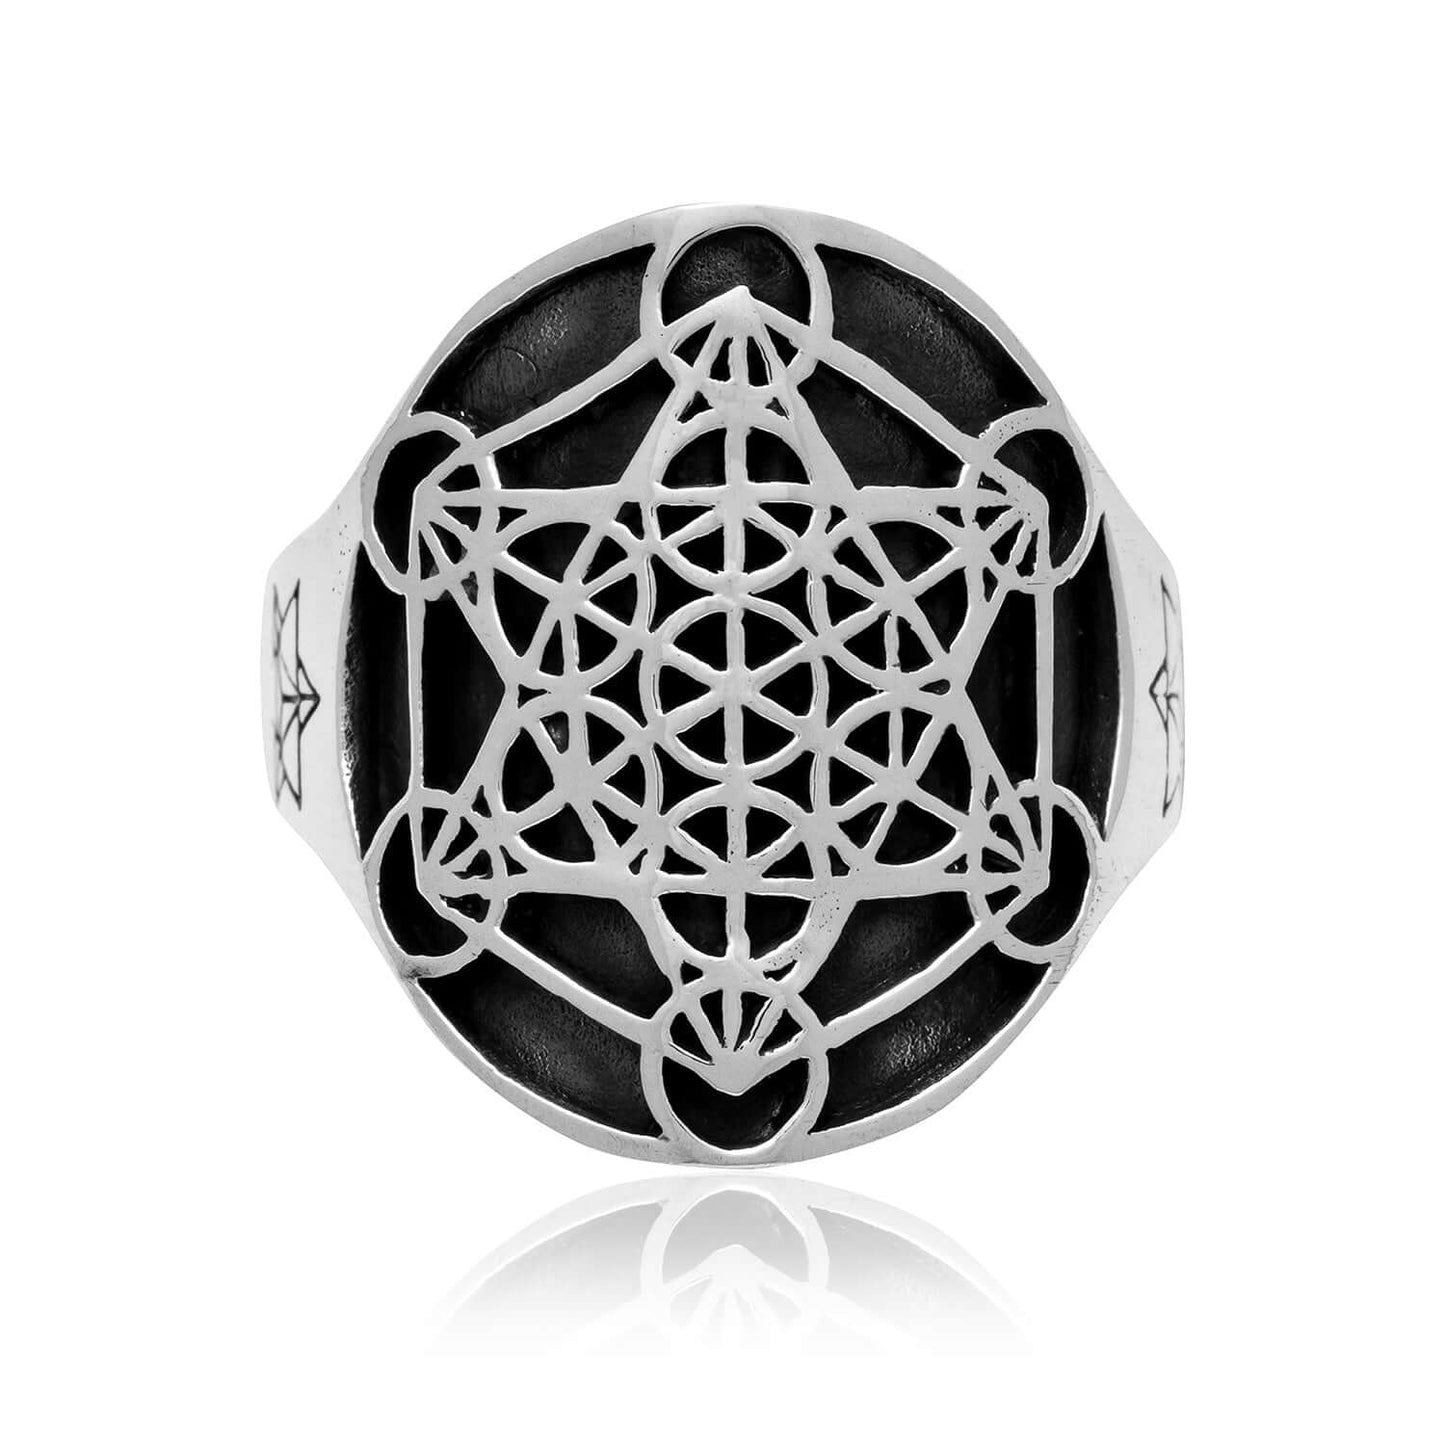 925 Sterling Silver Metatron Cube Angel Ring - SilverMania925